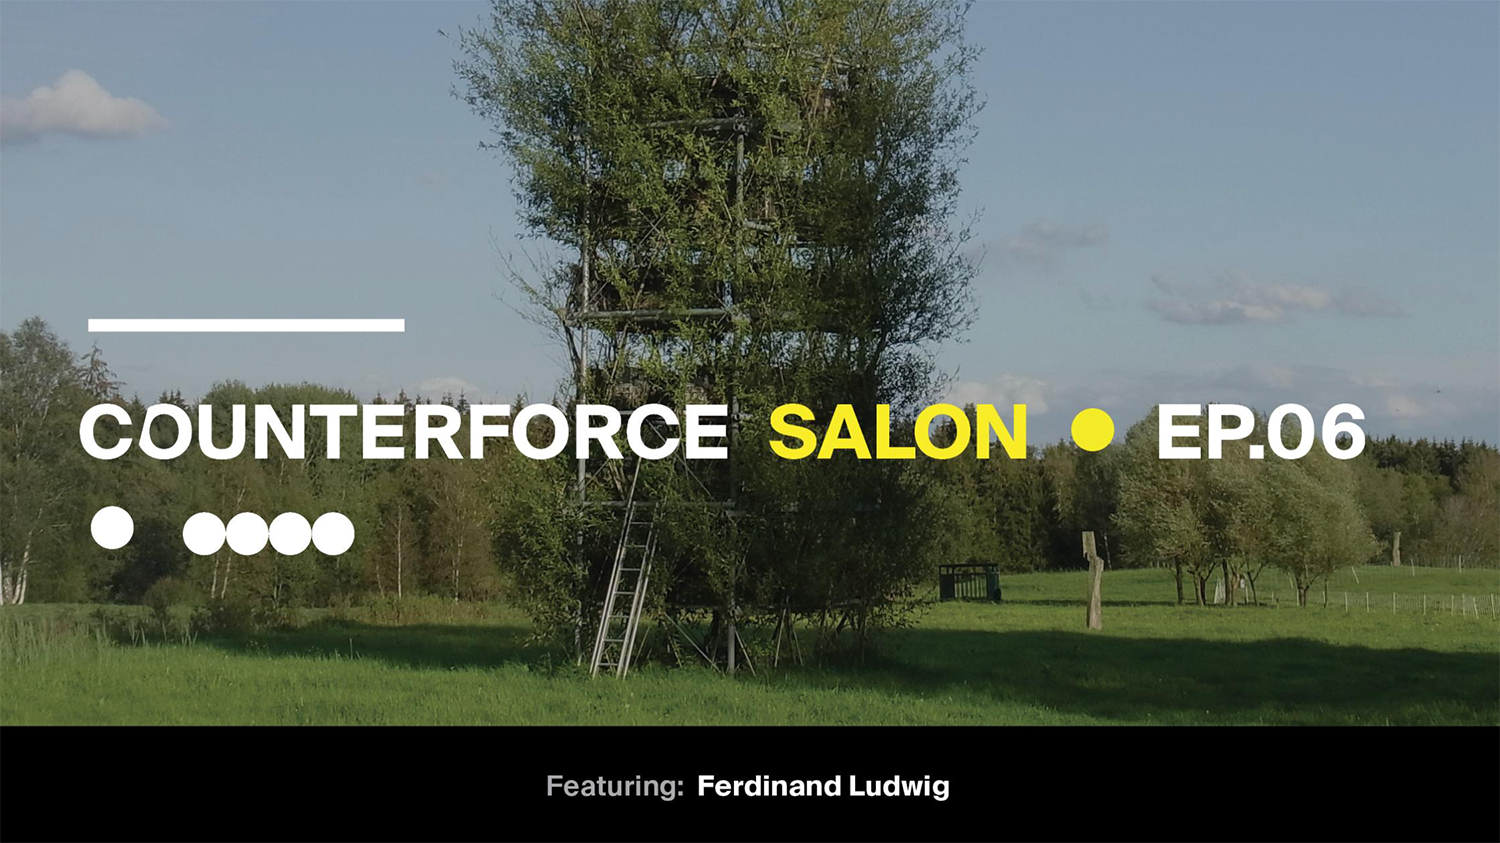 A tree in a field with a ladder. The text "counterforce salon ep6" is on top of the image.